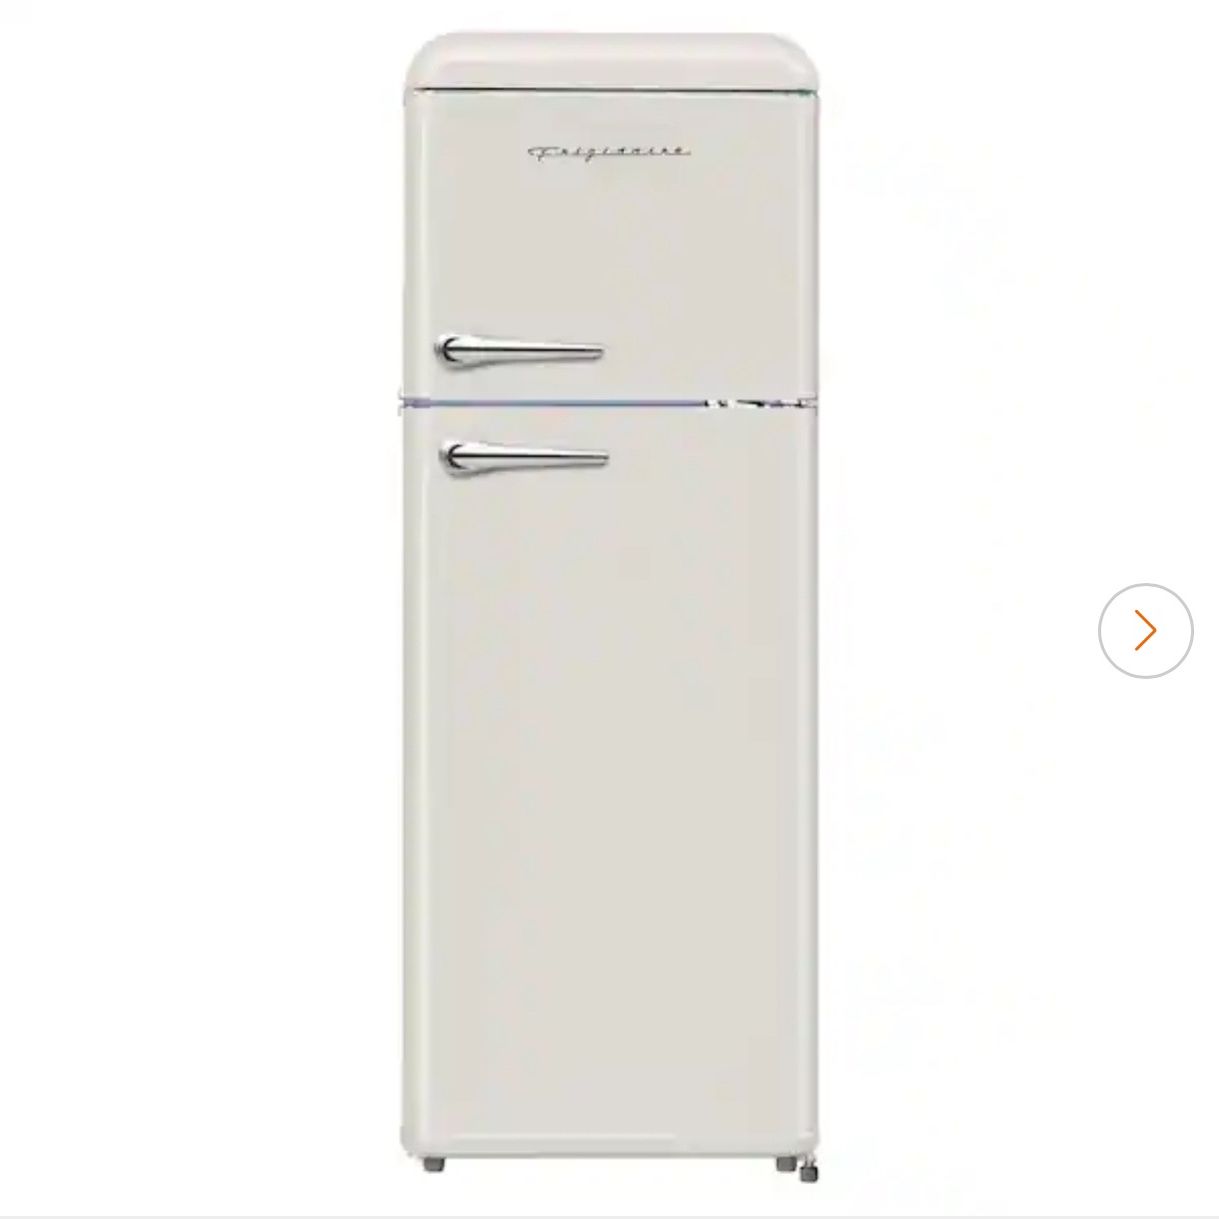 7.5 cu. ft. Mini Fridge in Cream with Rounded Corners and Top Freezer